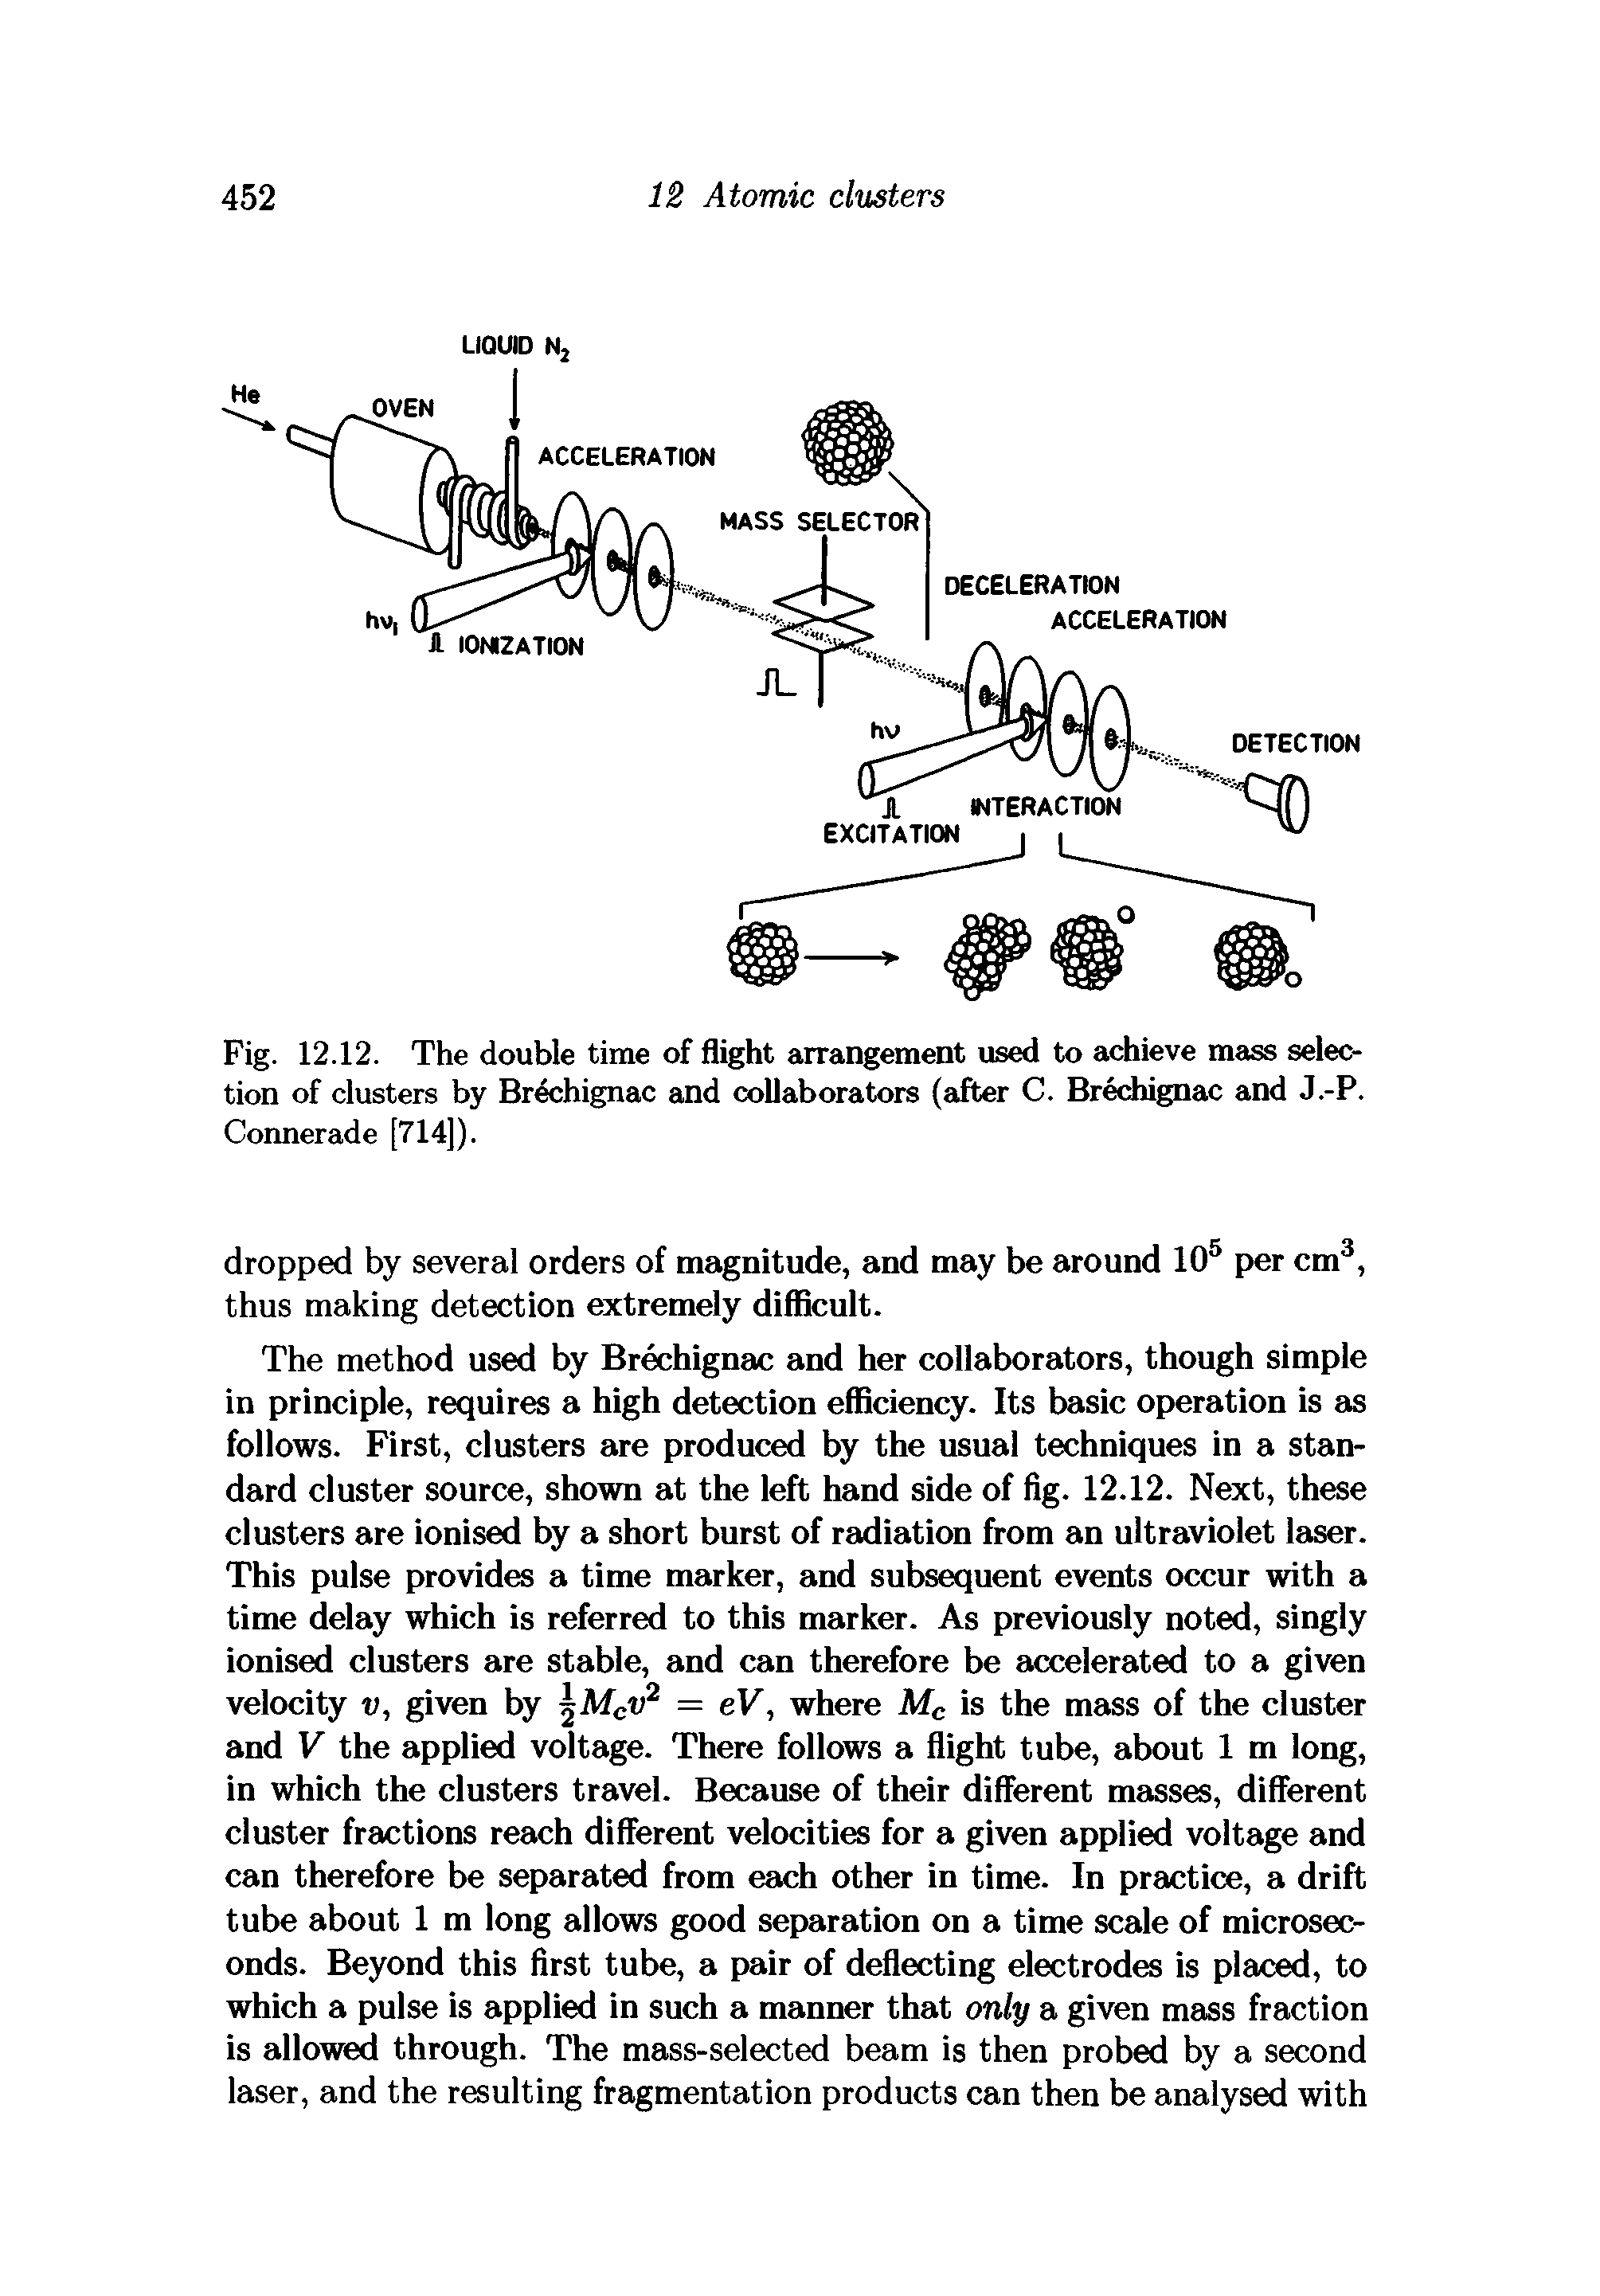 Fig. 12.12. The double time of flight arrangement used to achieve mass selection of clusters by Brechignac and collaborators (after C. Brechignac and J.-P. Connerade [714]).